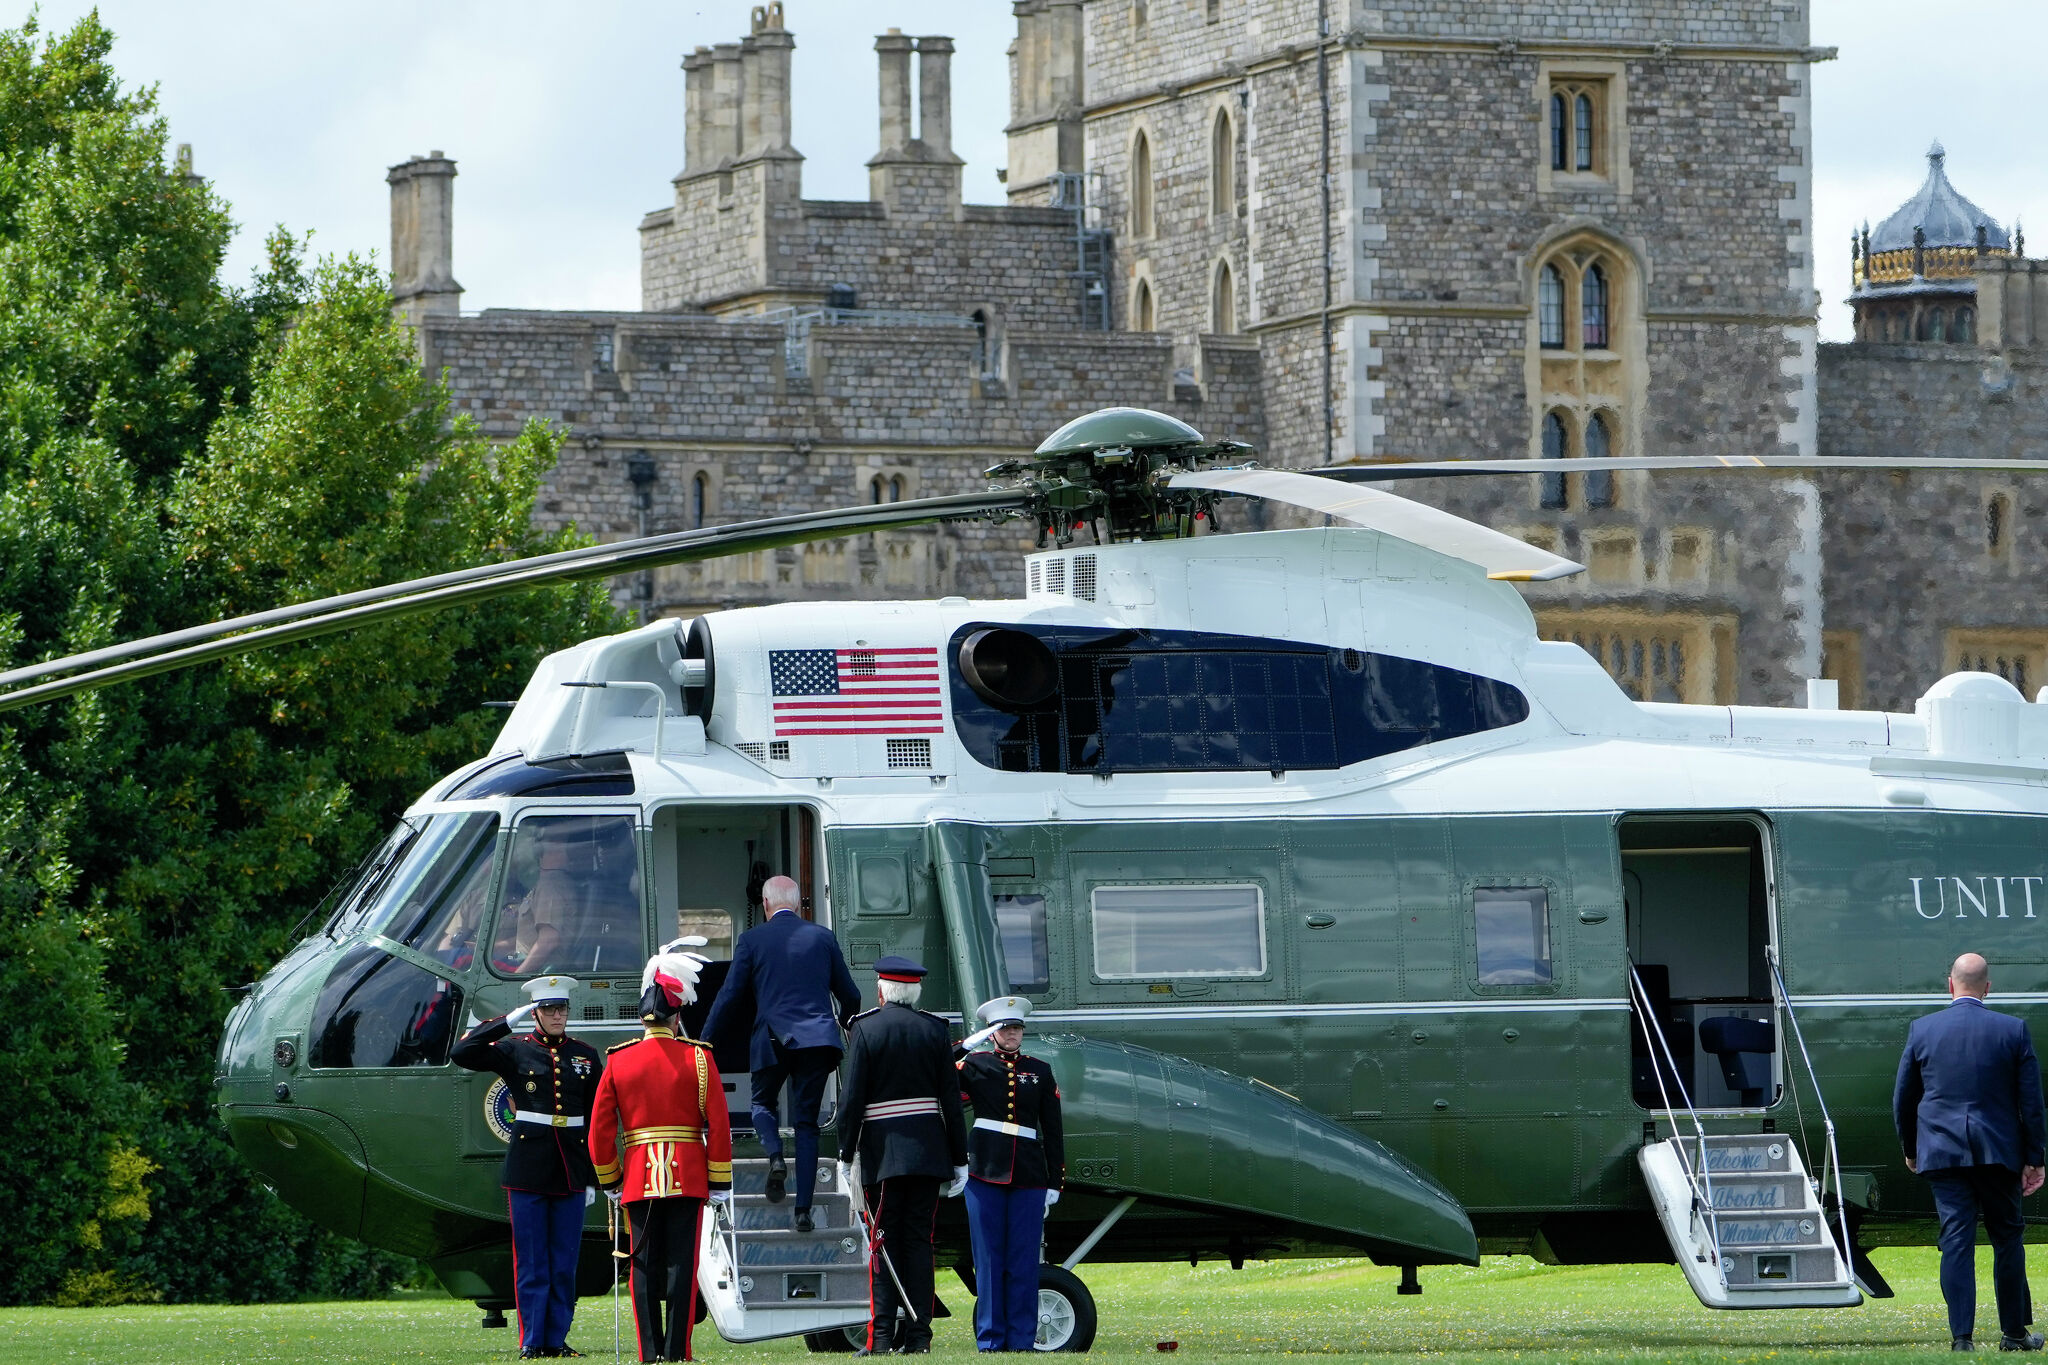 VH-92 Closer To Being Marine One But Critical Comms System Causing Delays